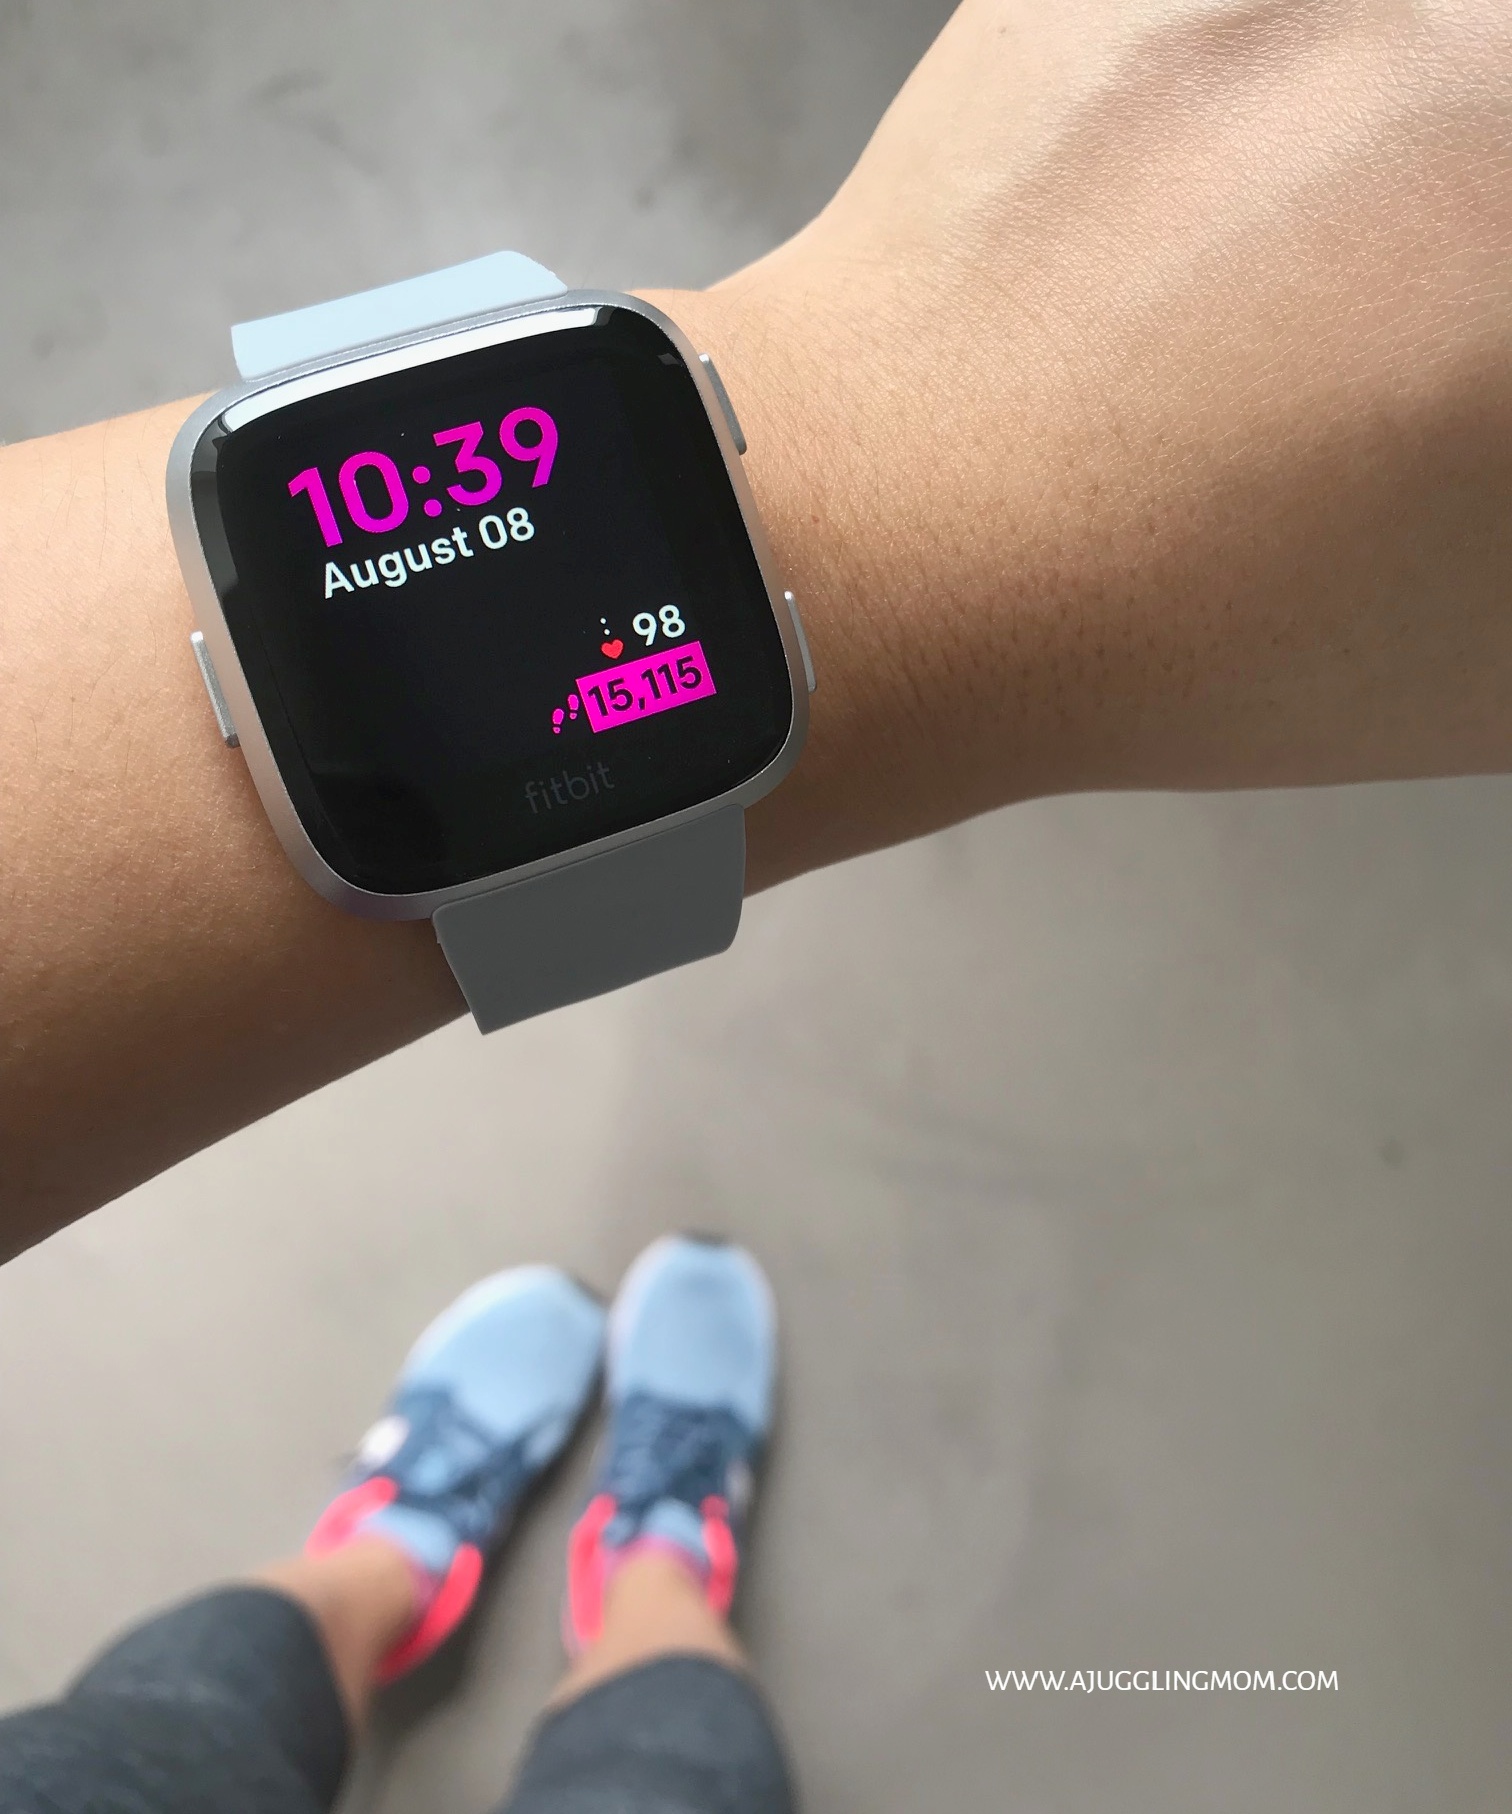 fitbit aia